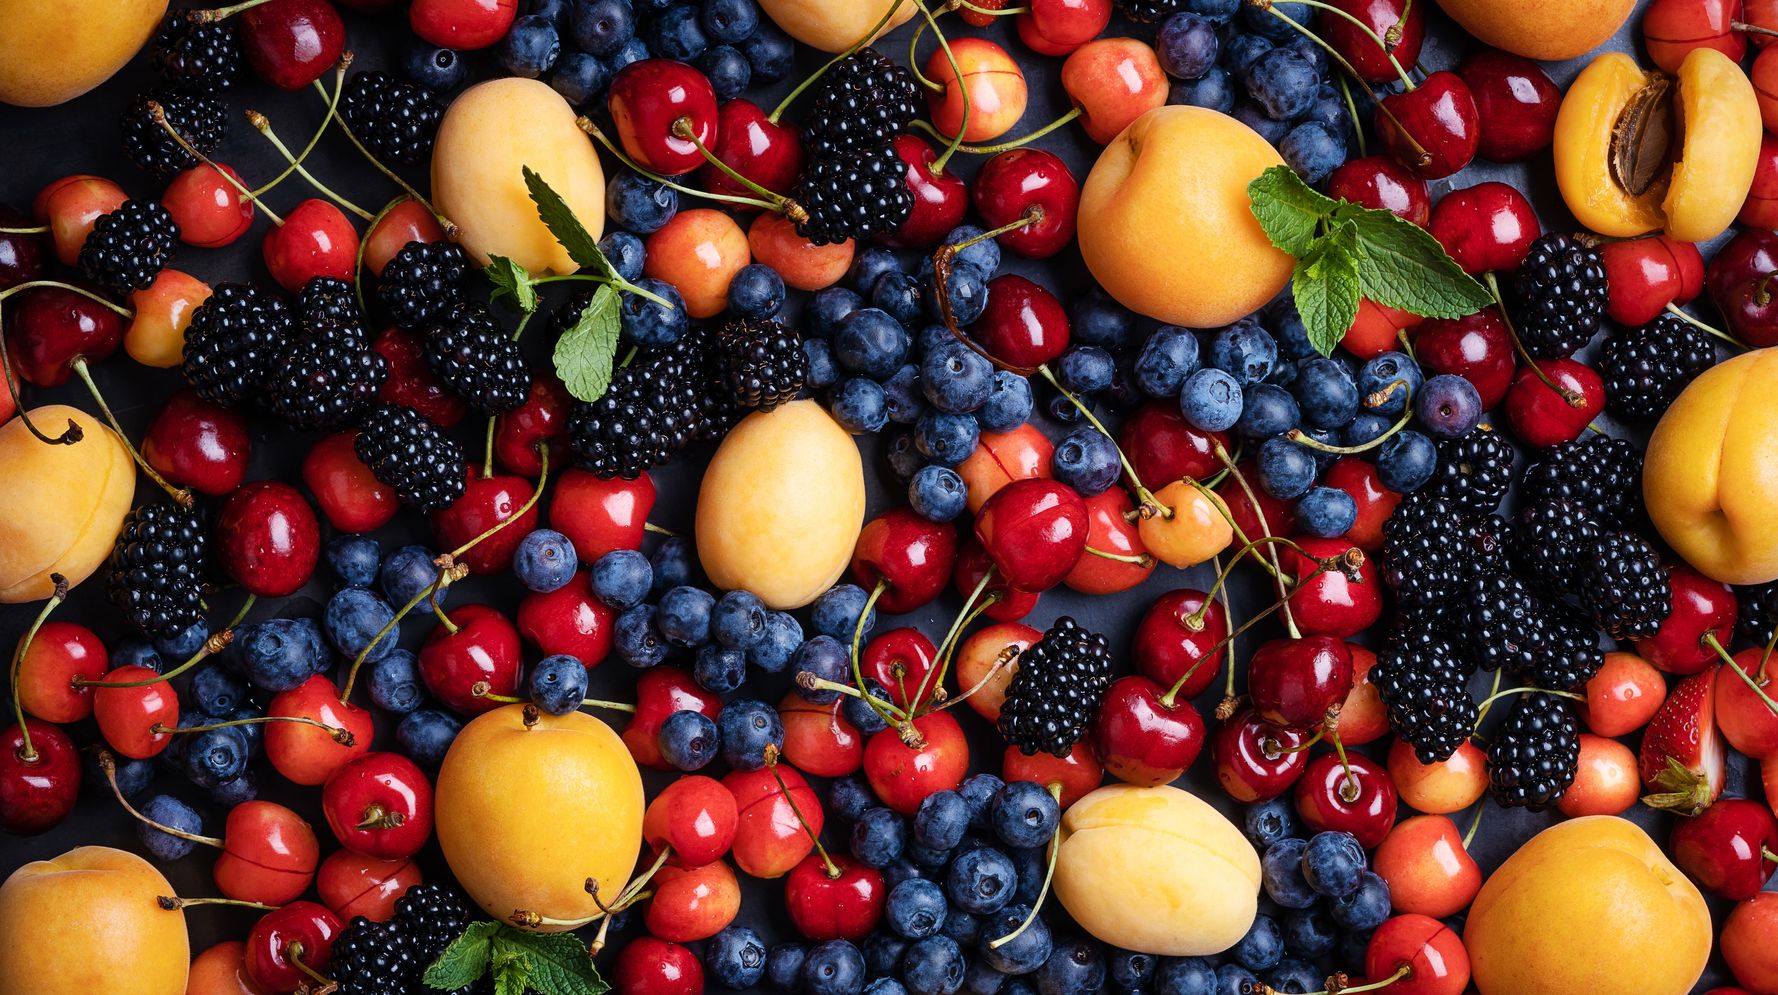 Why Some Summer Fruits Make Your Tongue Itch, Even If You're Not Allergic